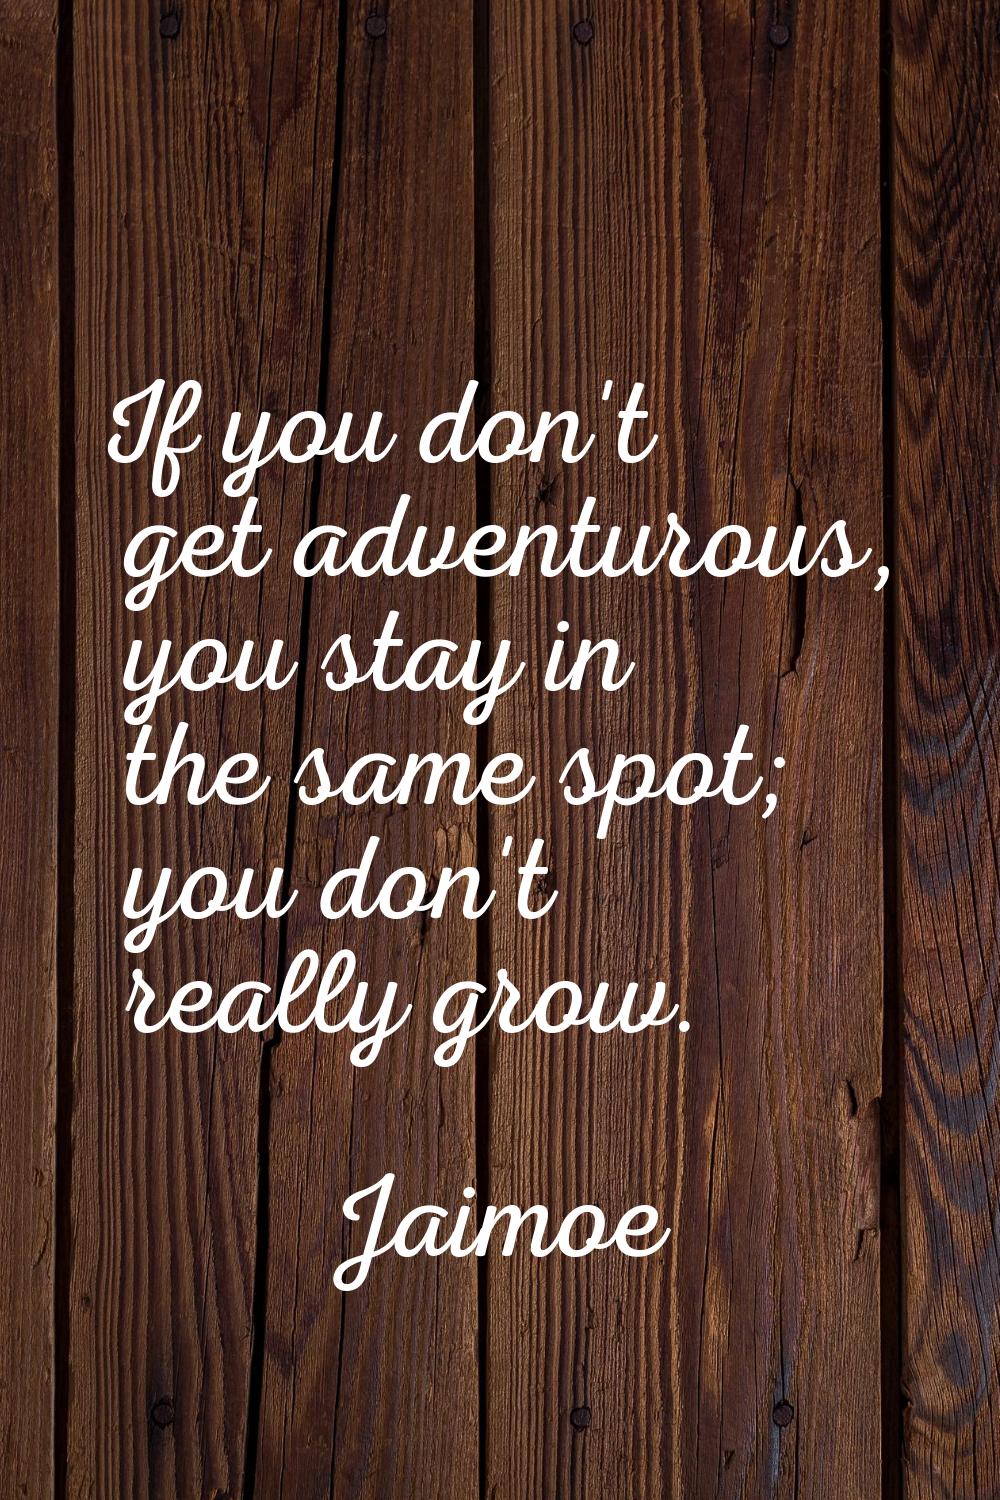 If you don't get adventurous, you stay in the same spot; you don't really grow.